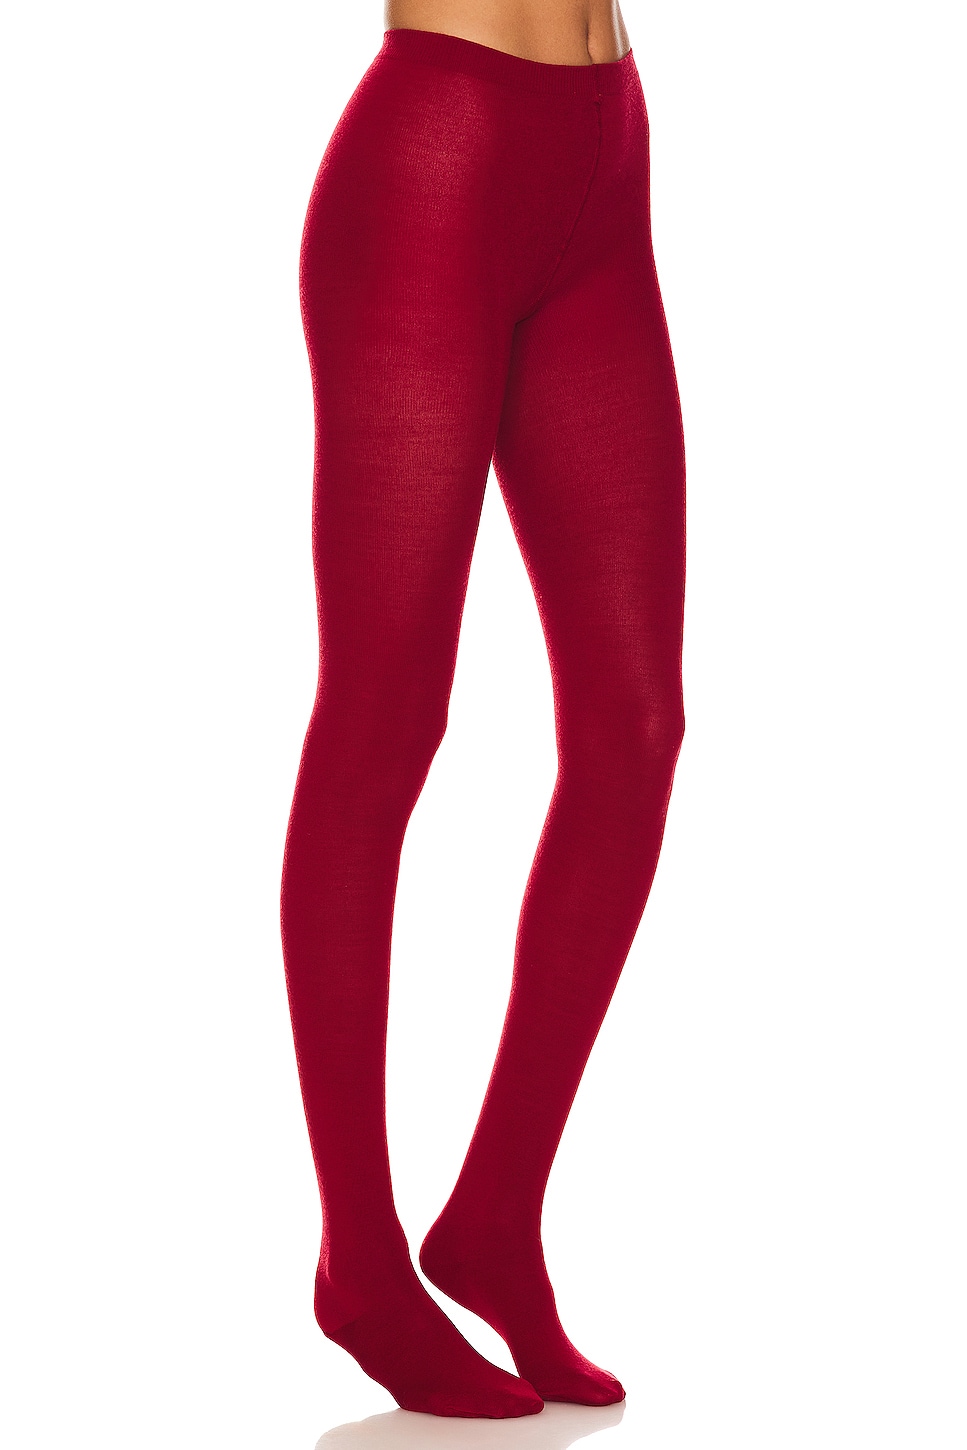 Wolford Merino Tights in Soft Cherry